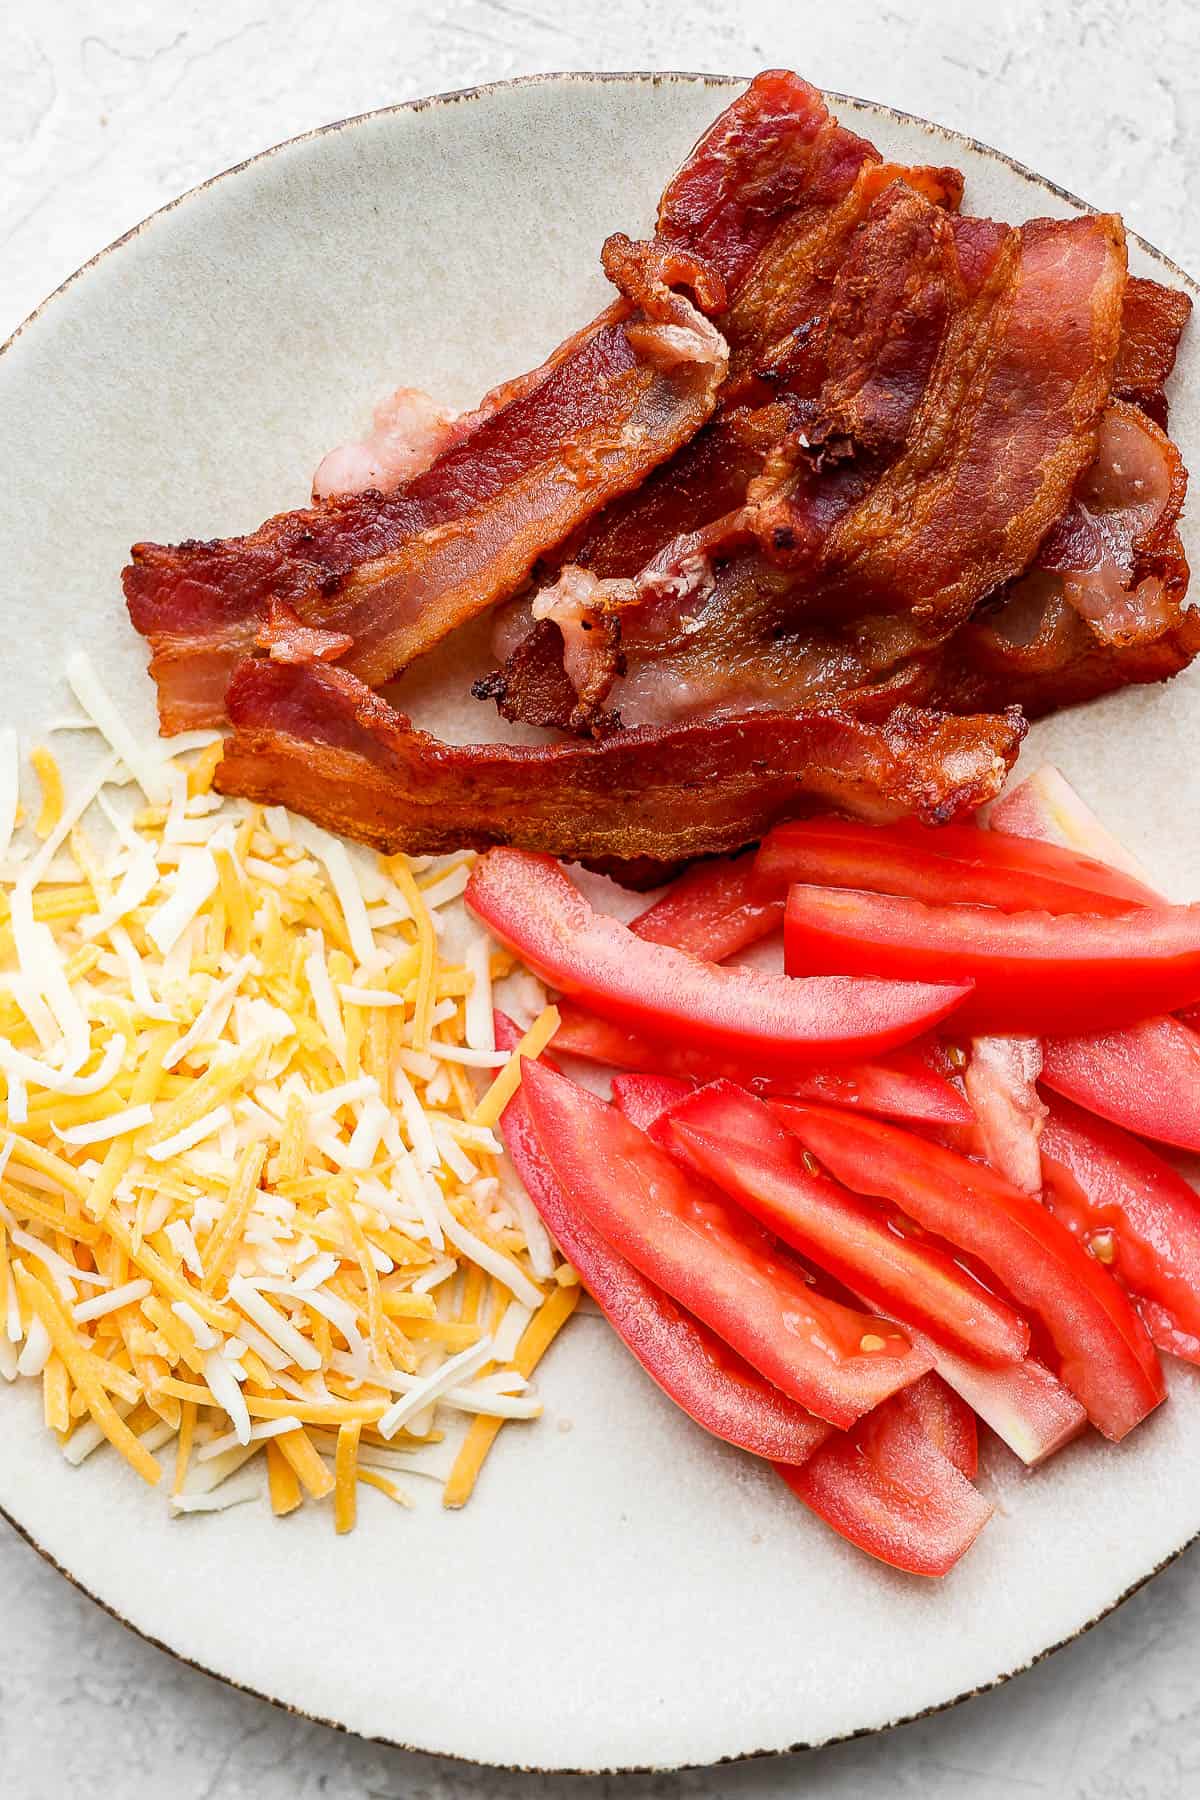 Bacon, tomatoes, and shredded cheese on a plate.